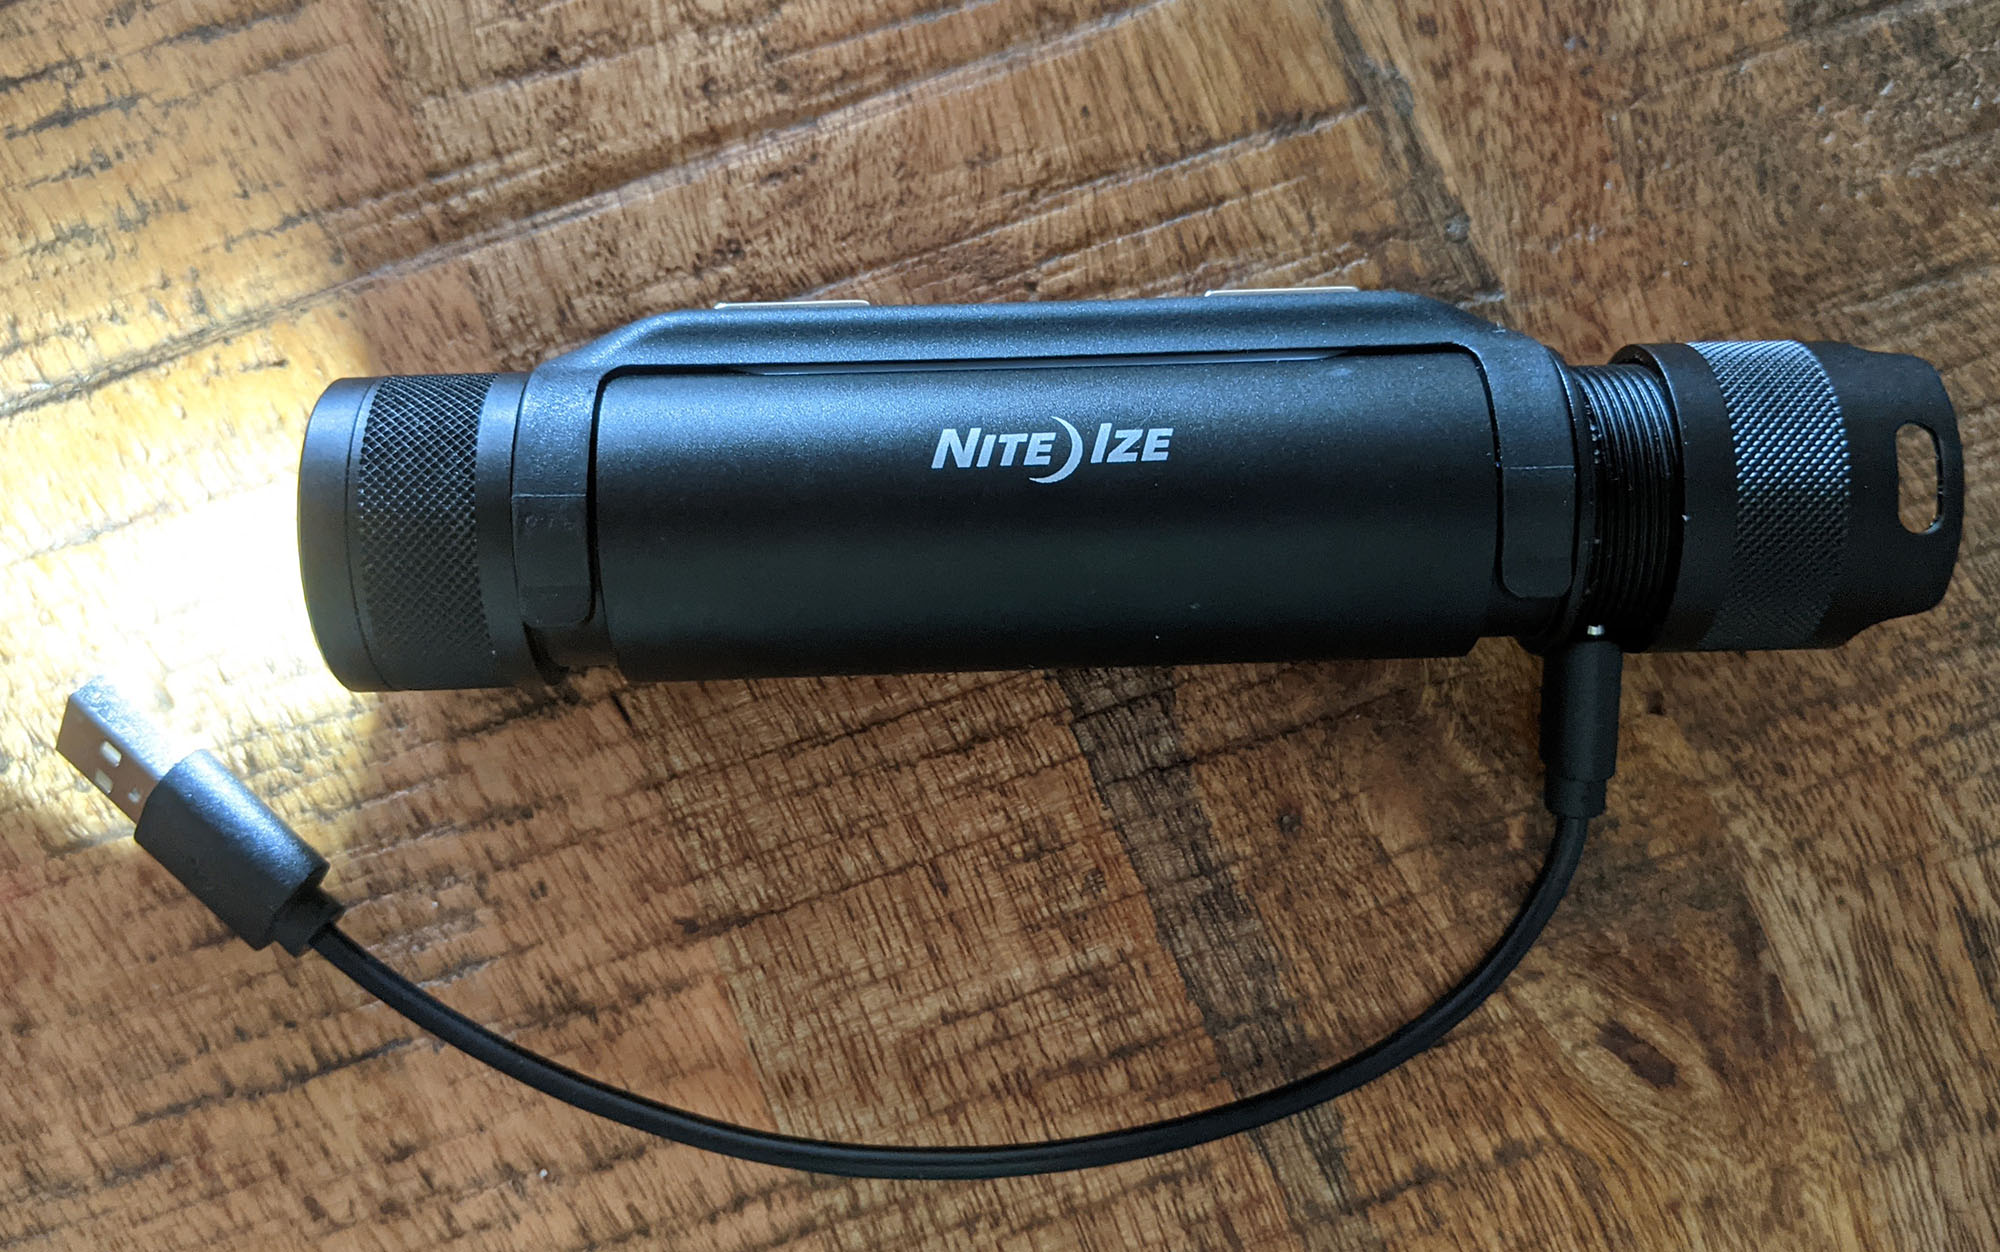 The Nite Ize Rechargeable Utility is one of the best rechargeable flashlights.